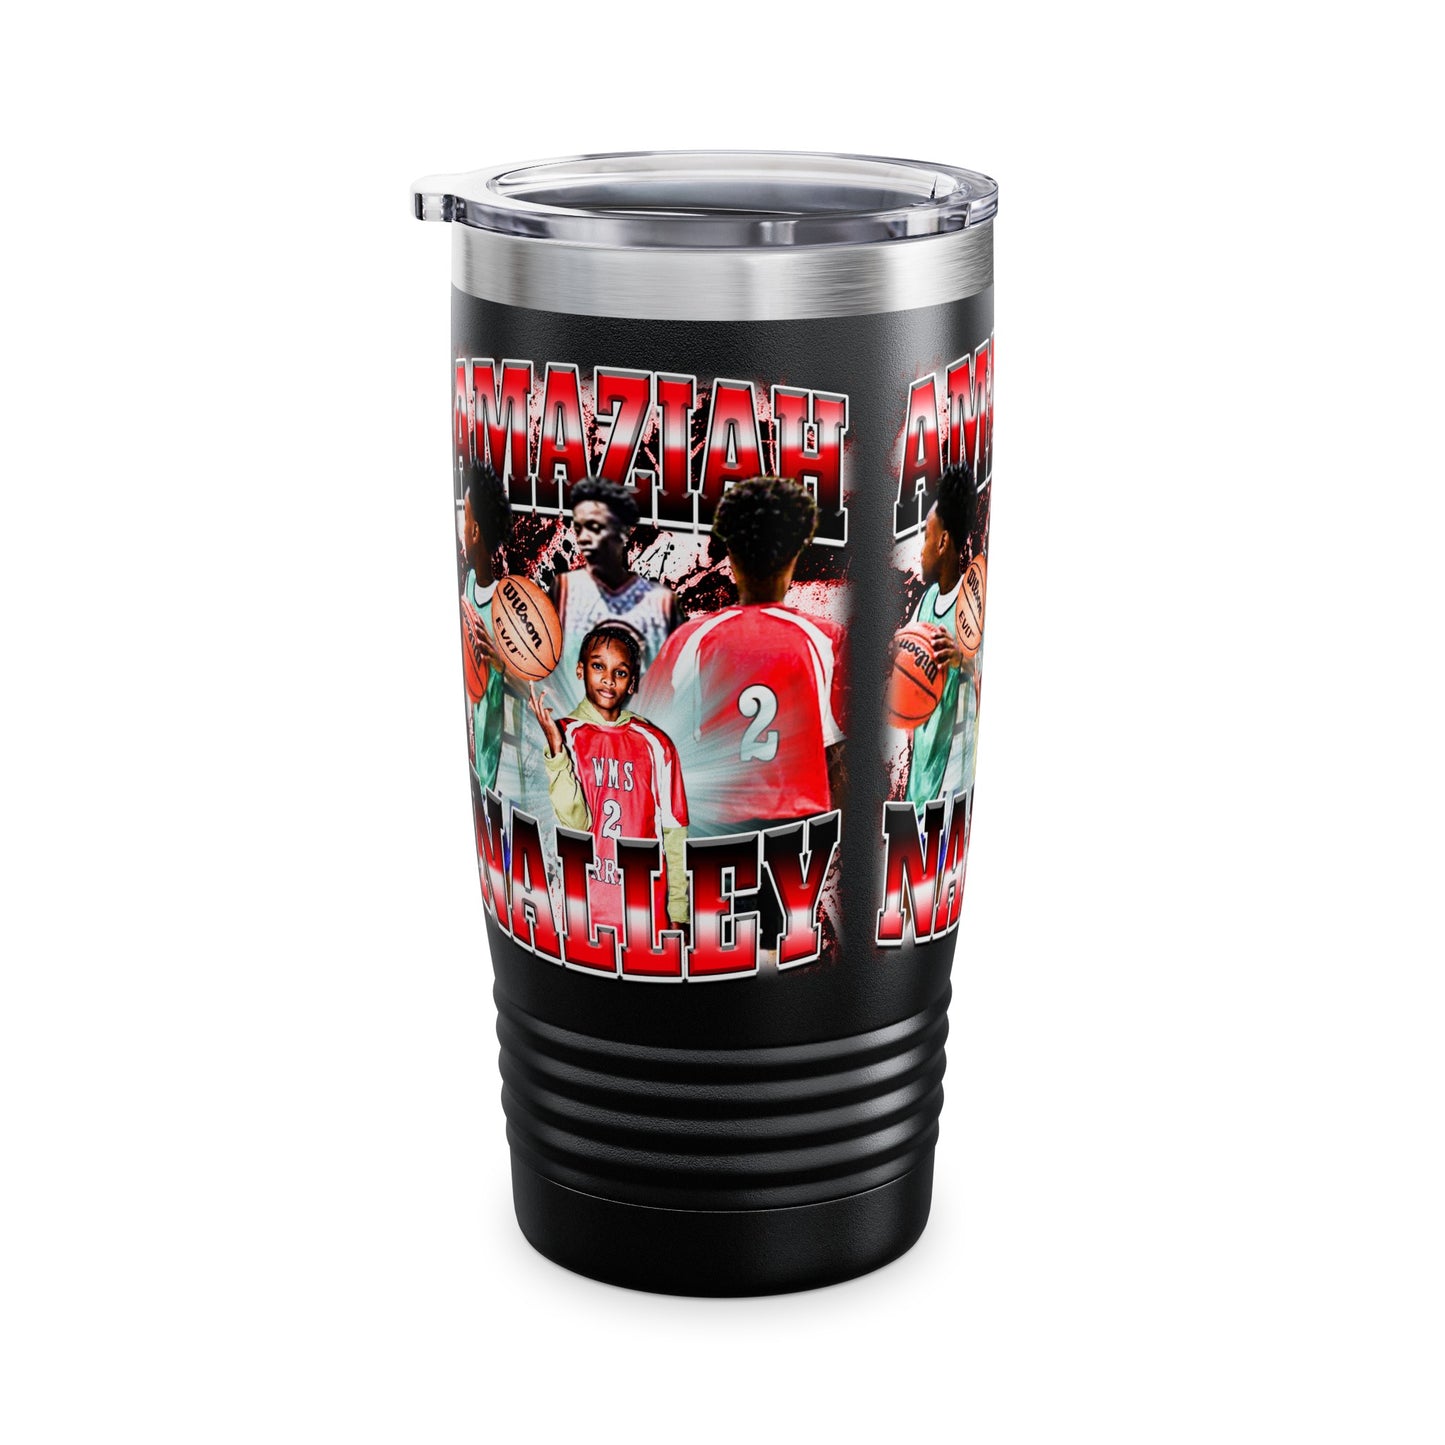 Amaziah Nalley Stainless Steal Tumbler